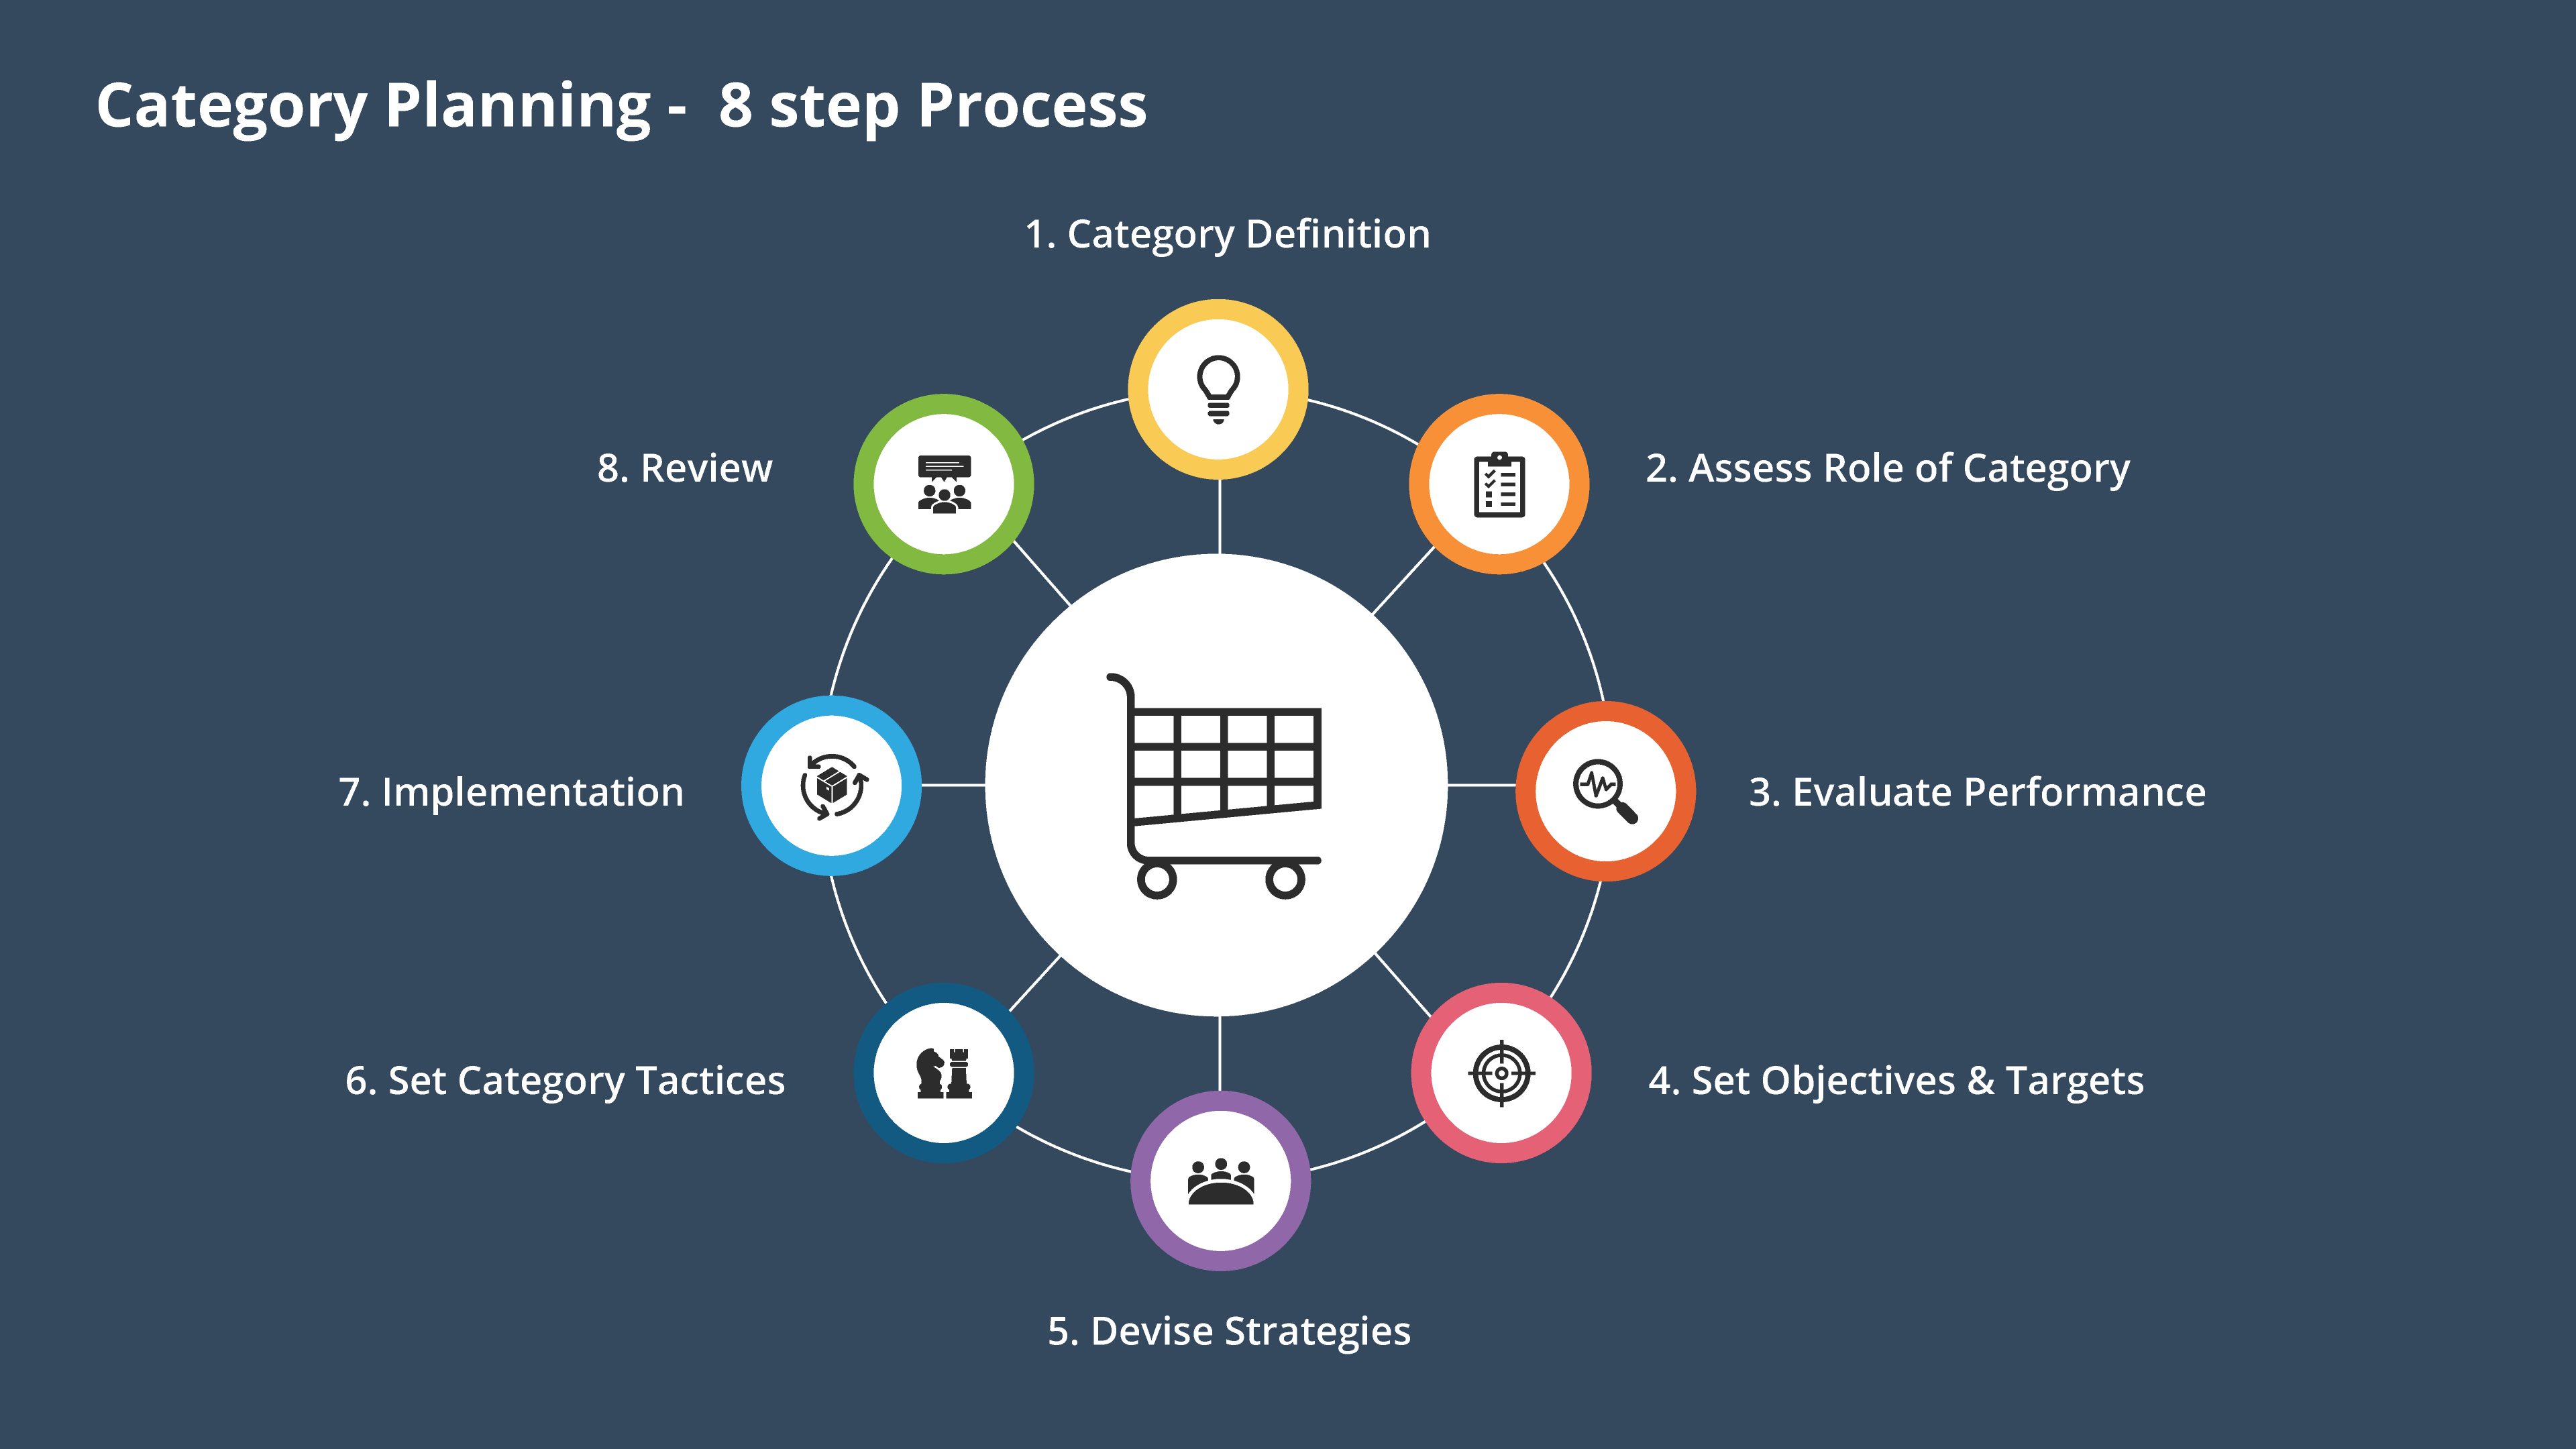 21 Step Process for Category Planning   ValQ